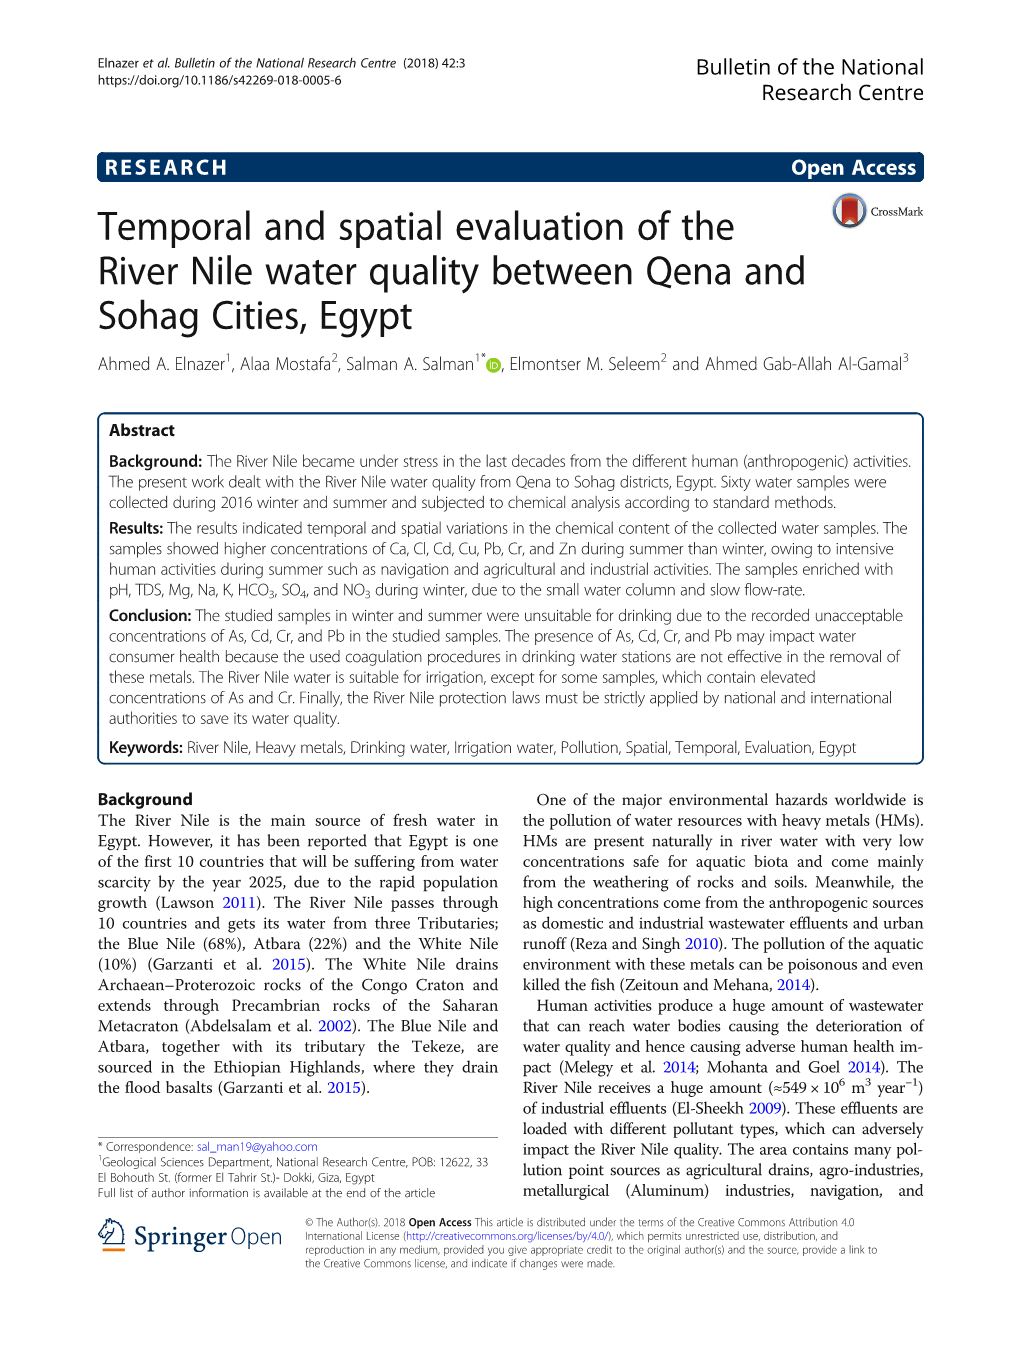 Temporal and Spatial Evaluation of the River Nile Water Quality Between Qena and Sohag Cities, Egypt Ahmed A